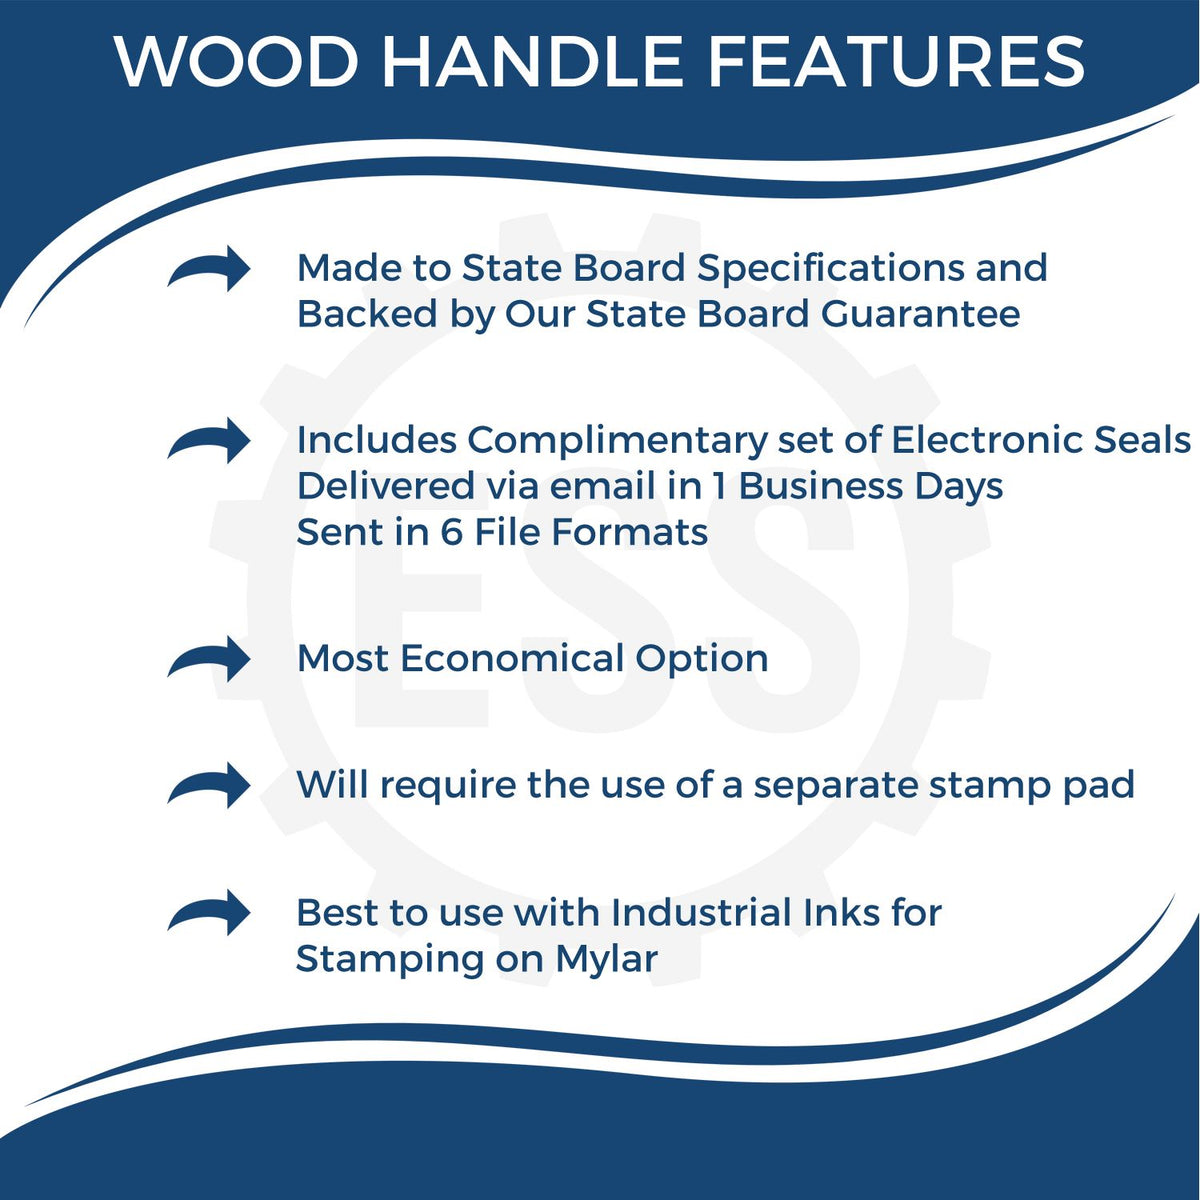 A picture of an infographic highlighting the selling points for the Wooden Handle Washington Rectangular Notary Public Stamp